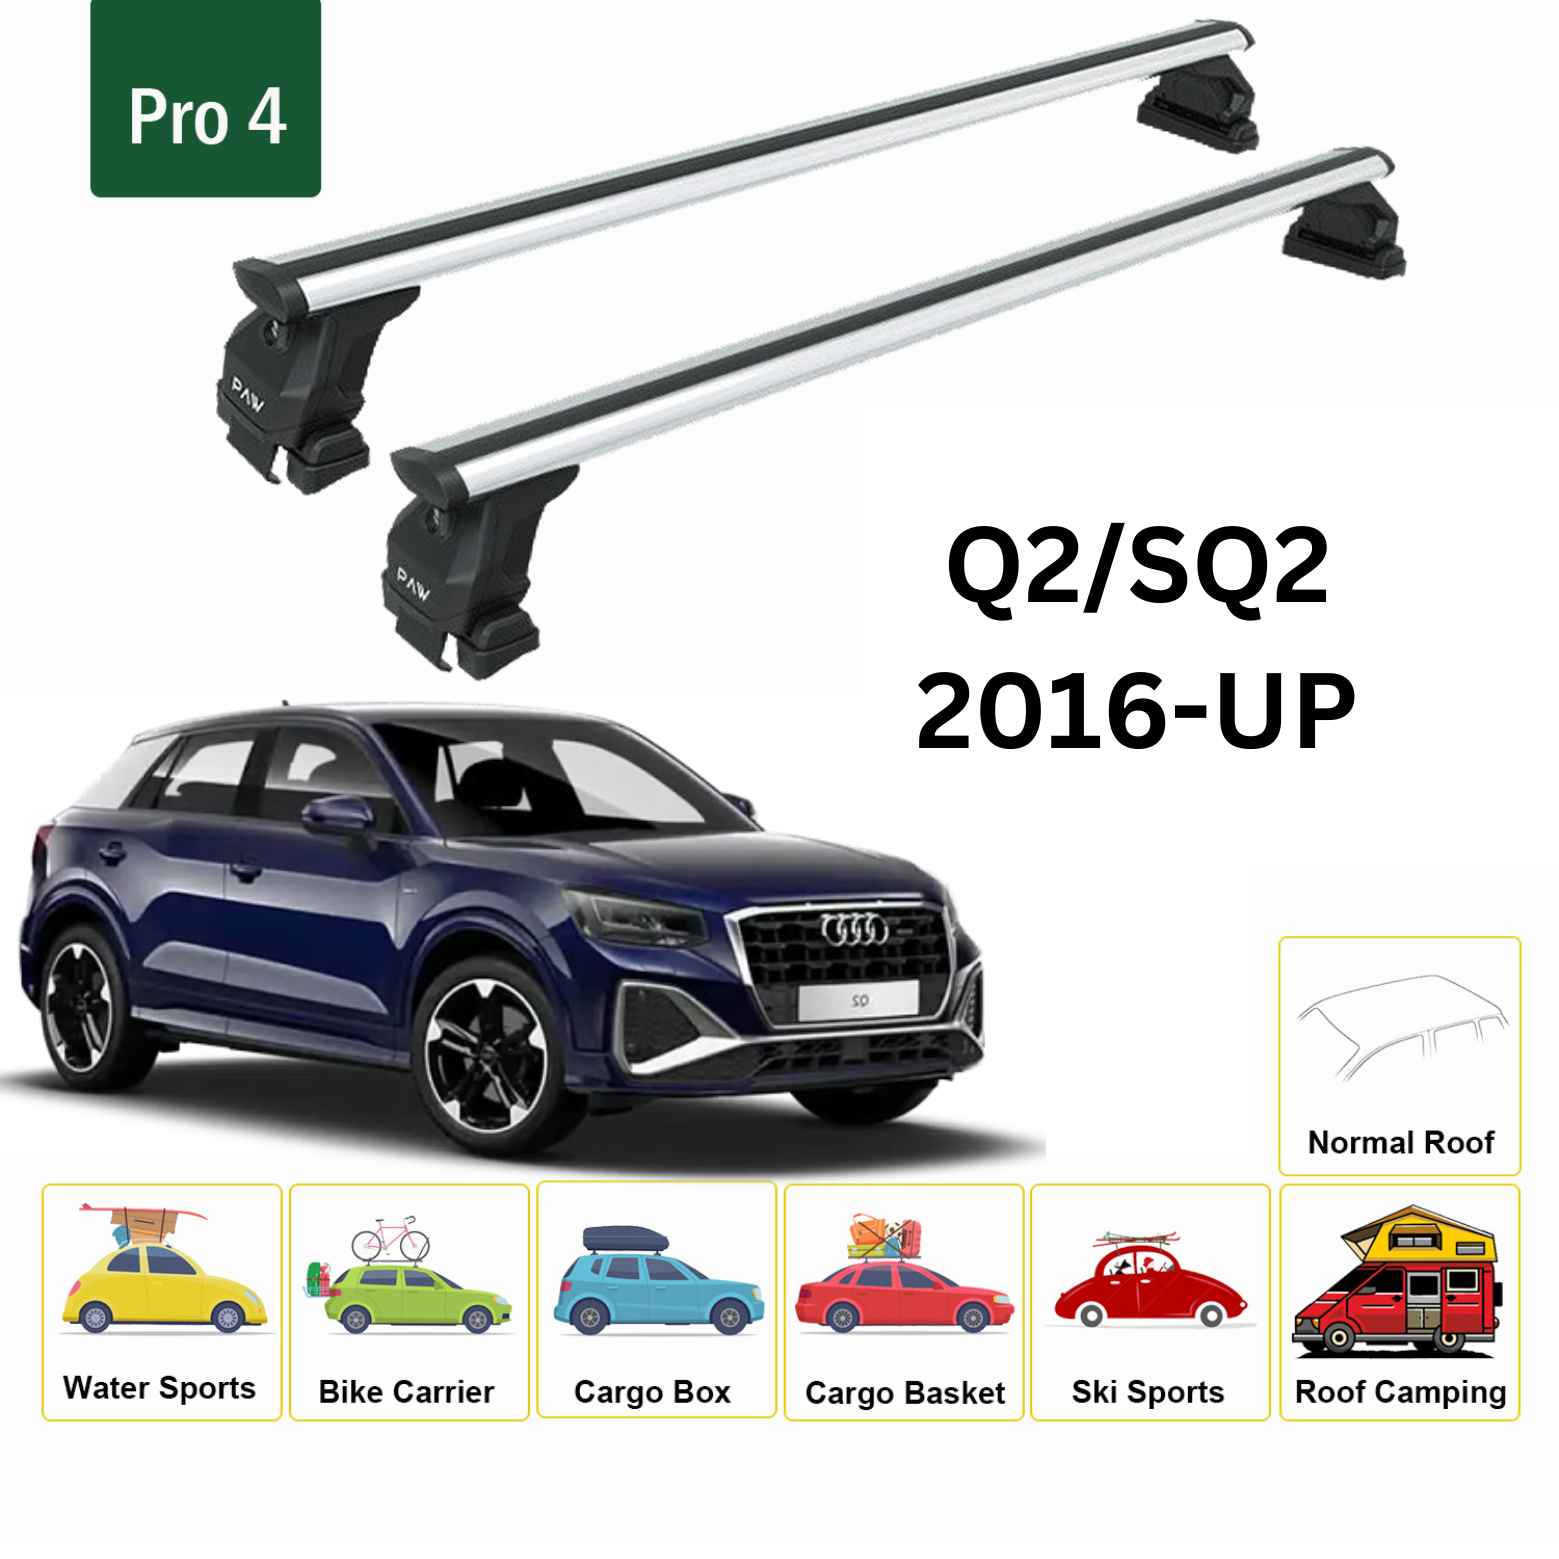 For Audi Q2/SQ2 2016-Up Roof Rack Cross Bars Normal Roof Alu Silver - 0